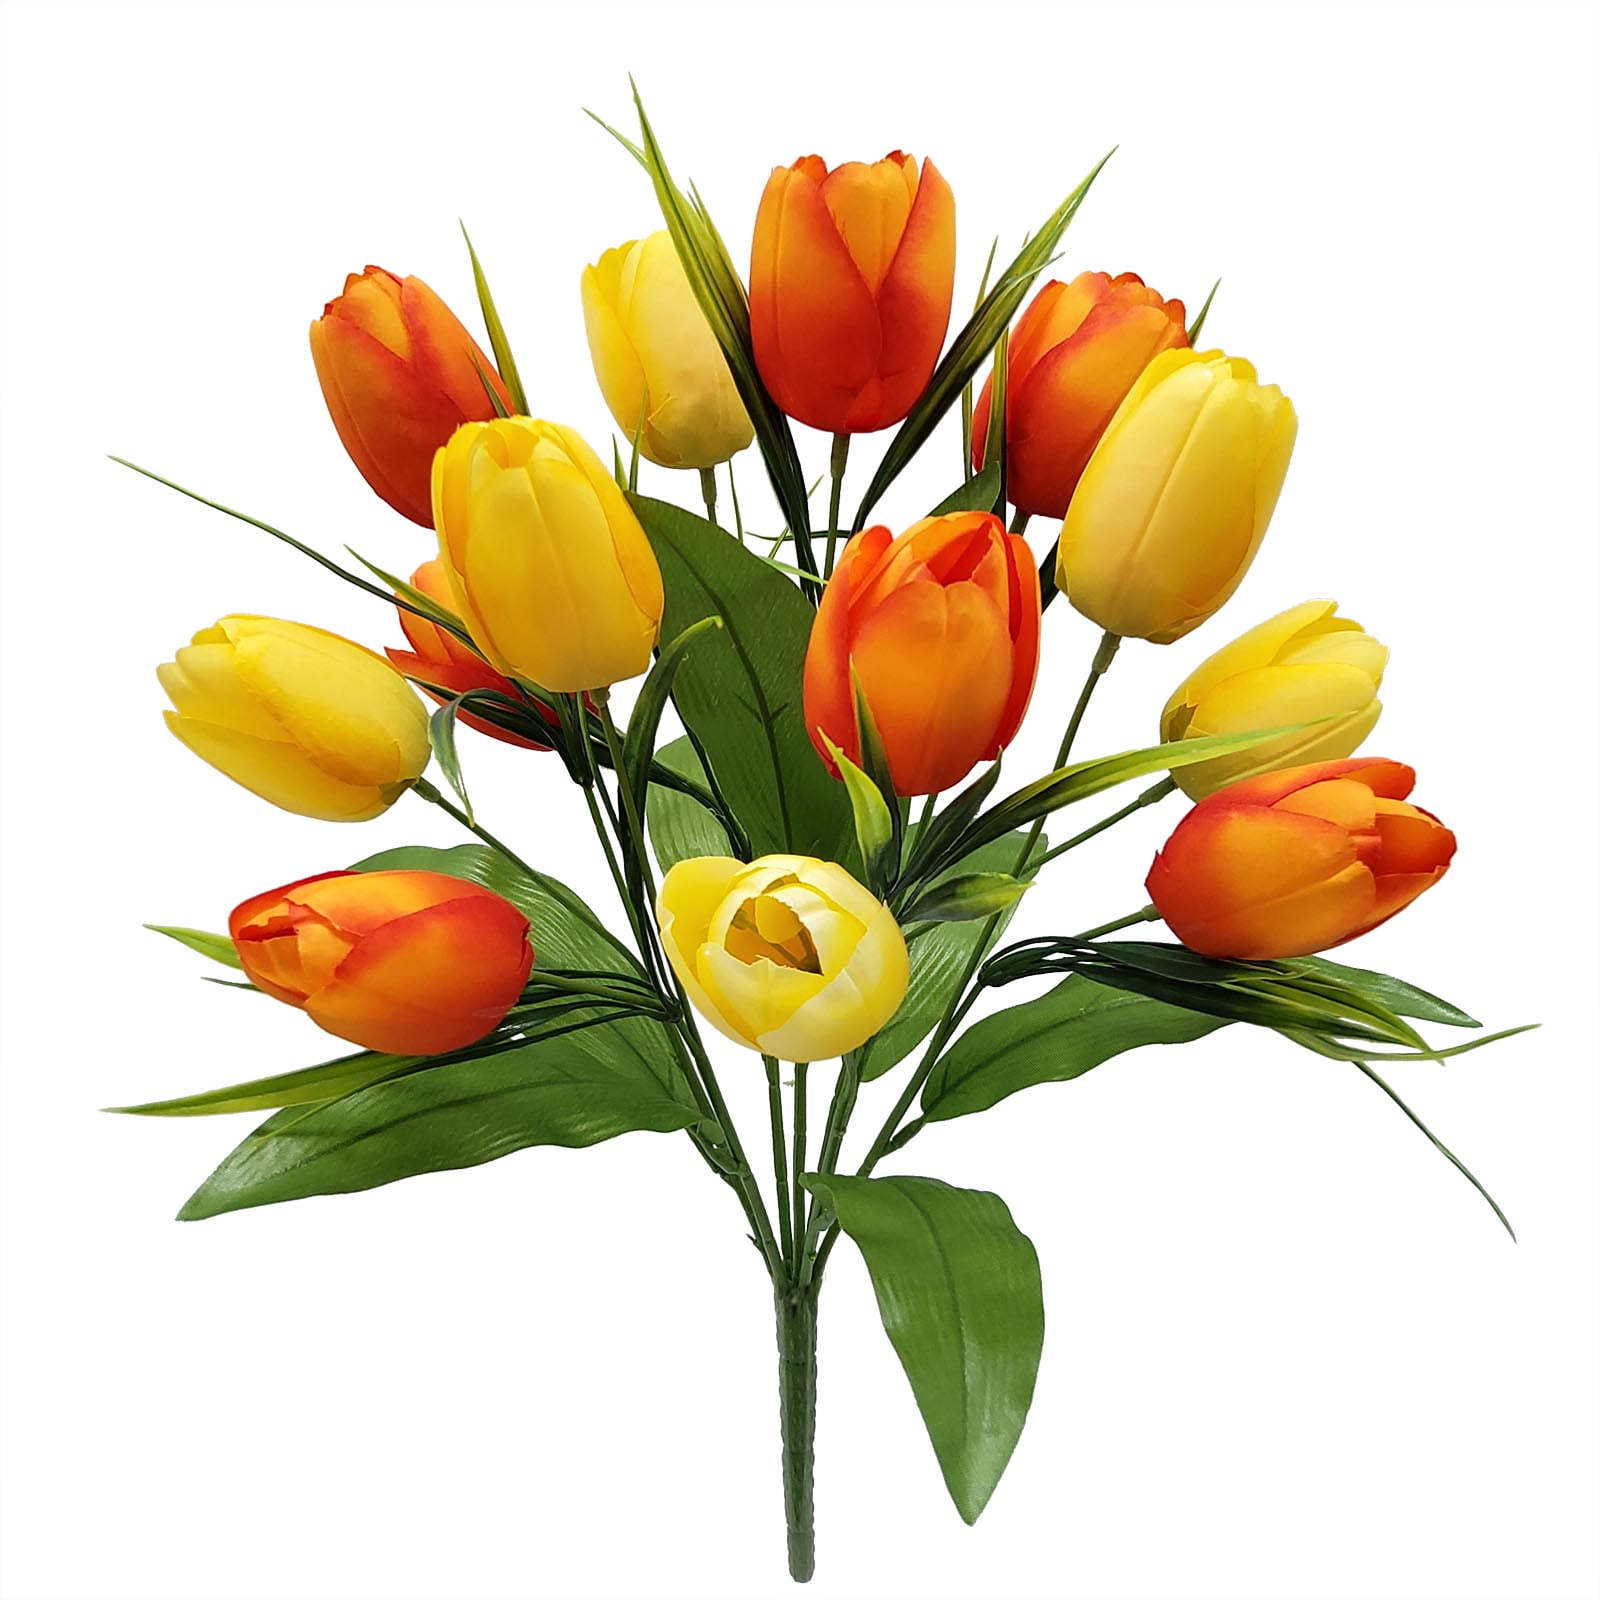 Mainstays 16" Artificial Floral Bush, Tulip Flower, Orange and Yellow Colors